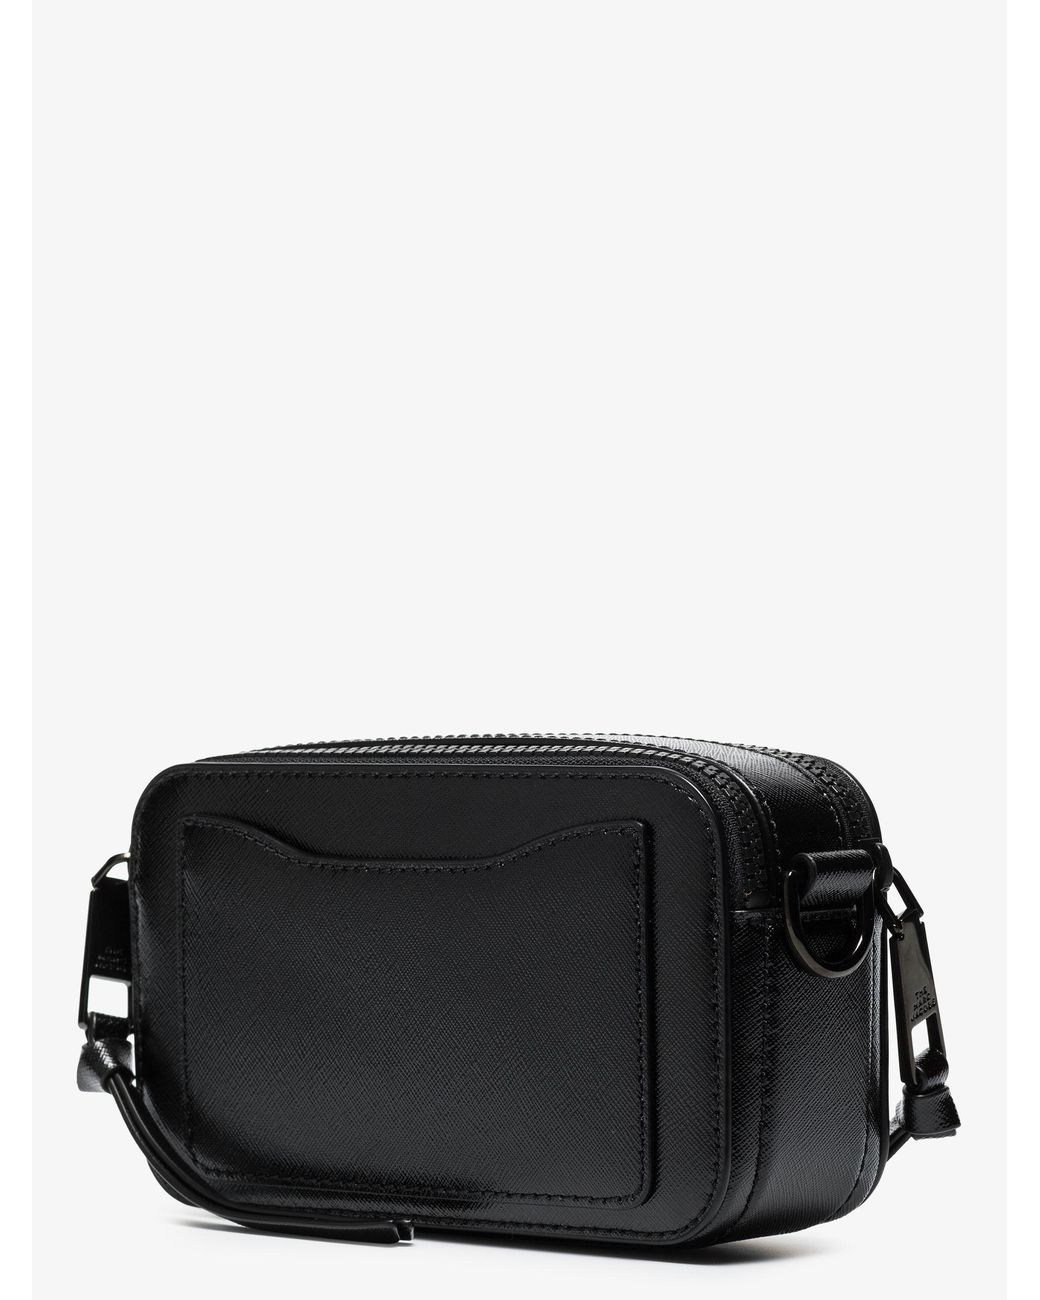 Snapshot leather crossbody bag Marc Jacobs Black in Leather - 31782811